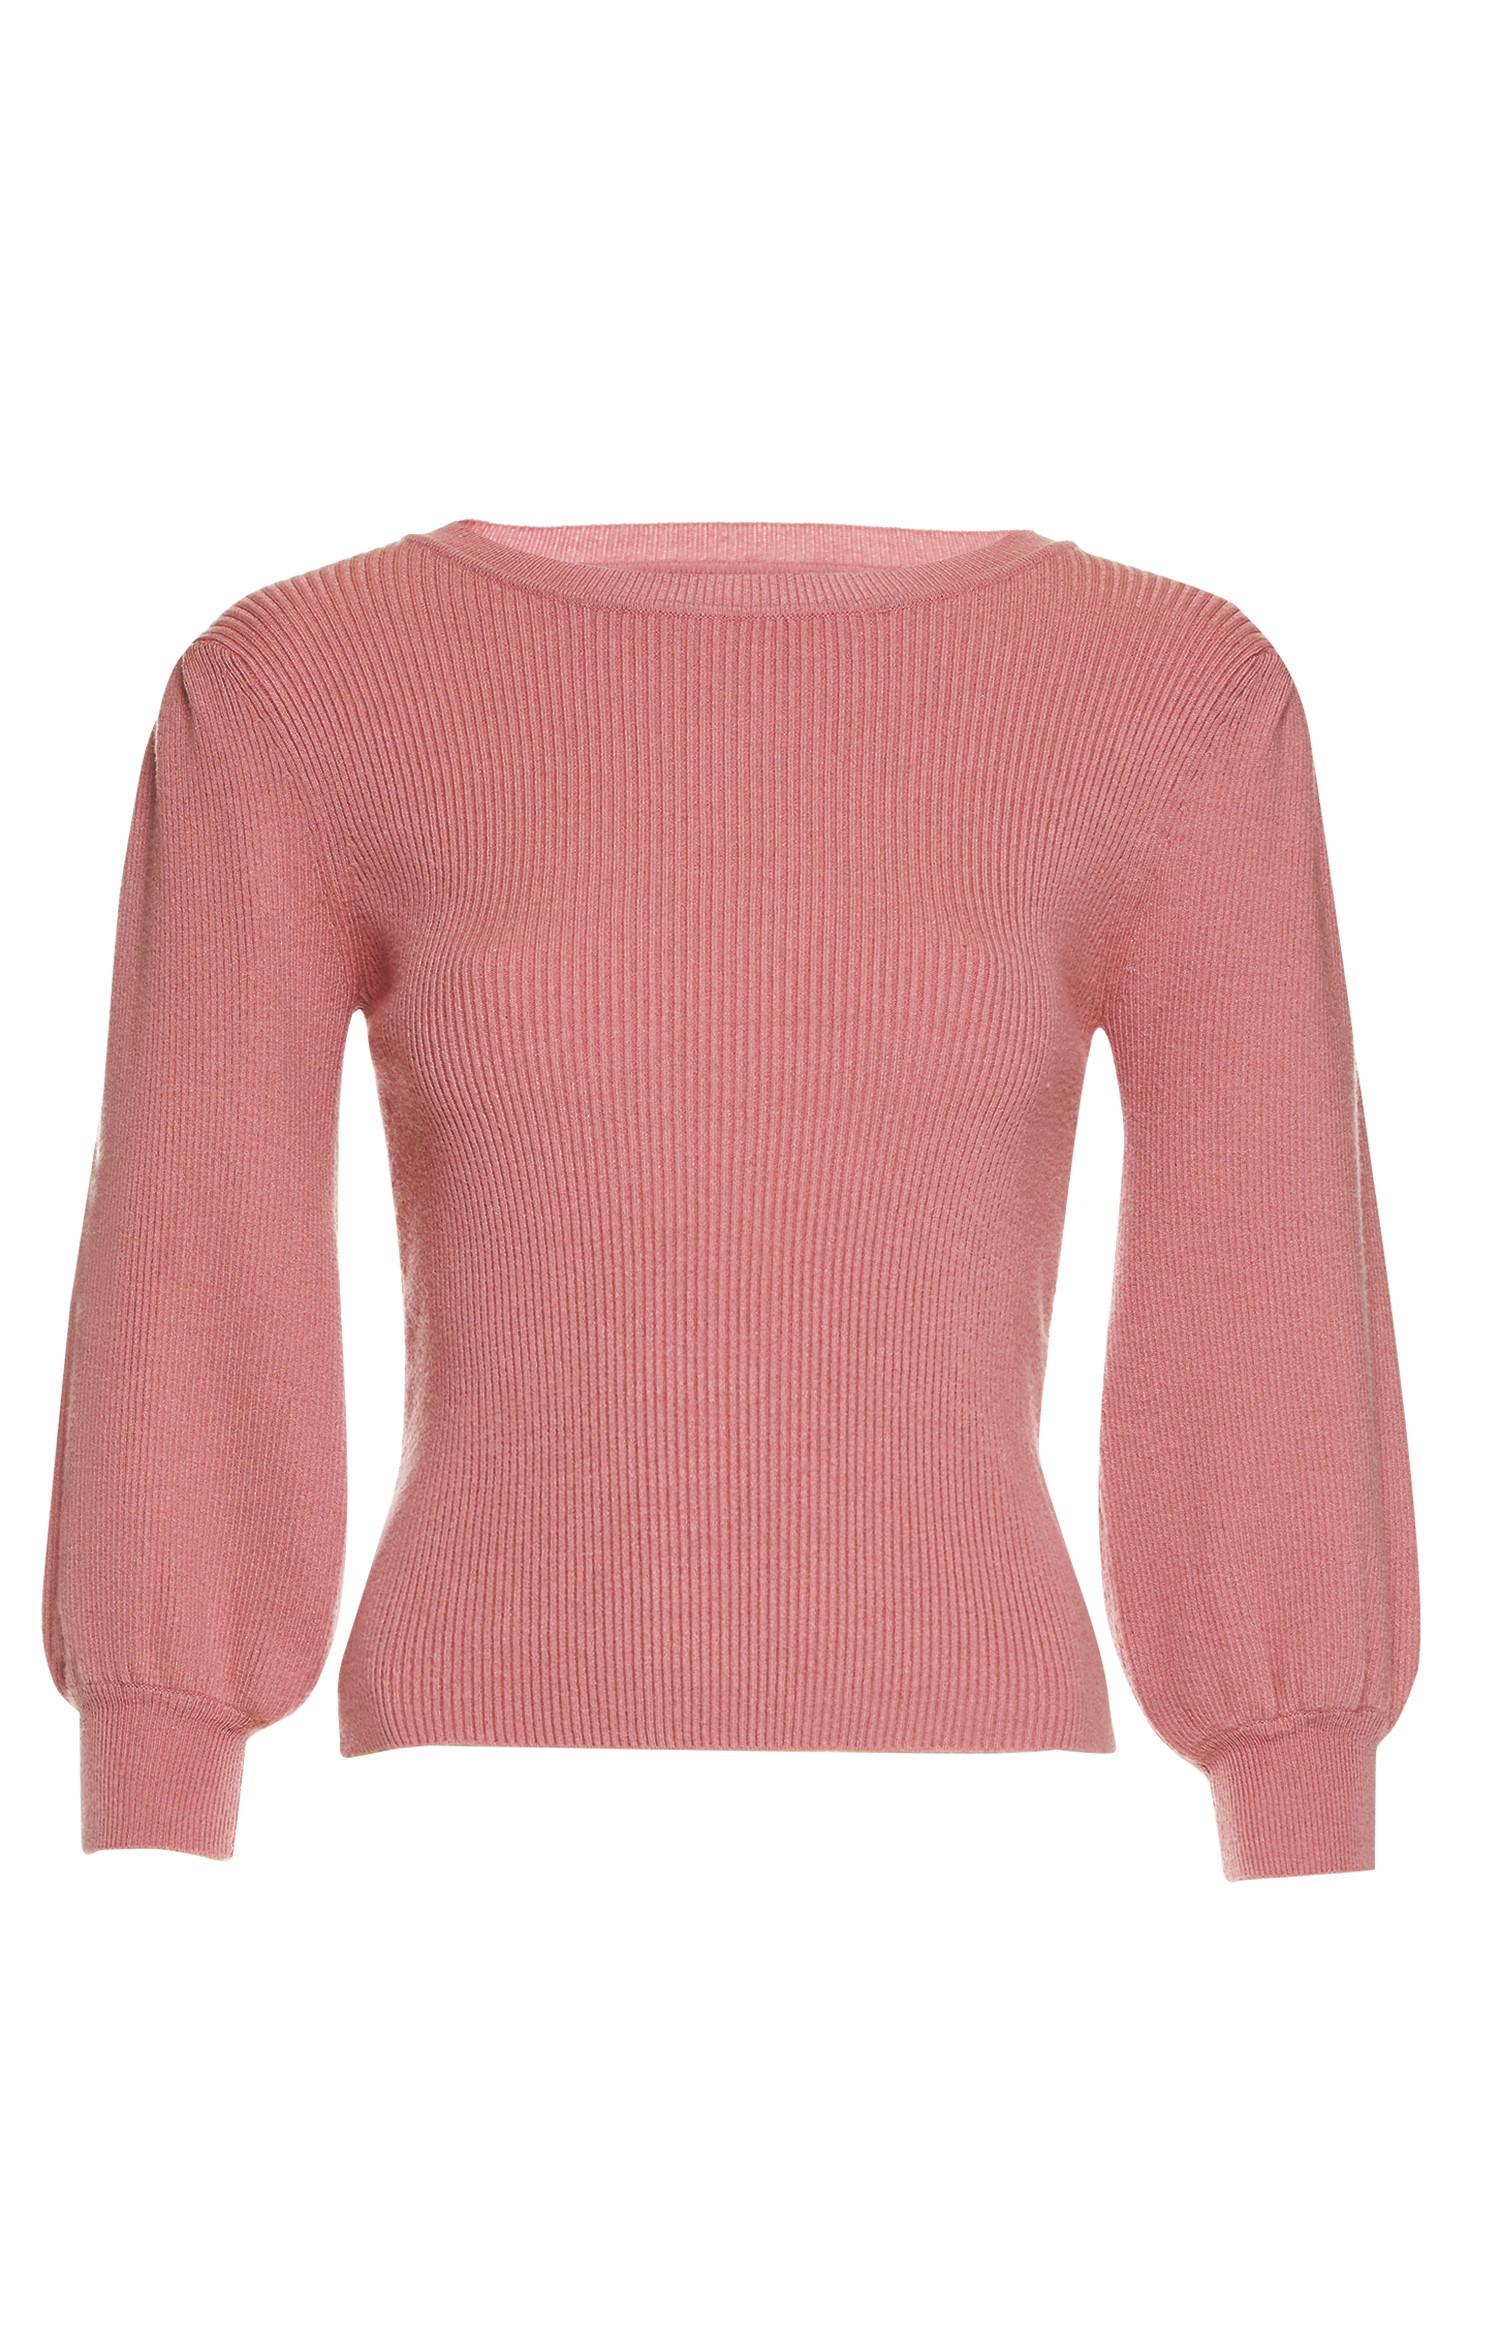 Pink Puff Sleeve Jumper | Women's Jumpers & Sweaters | Women's Jumpers ...